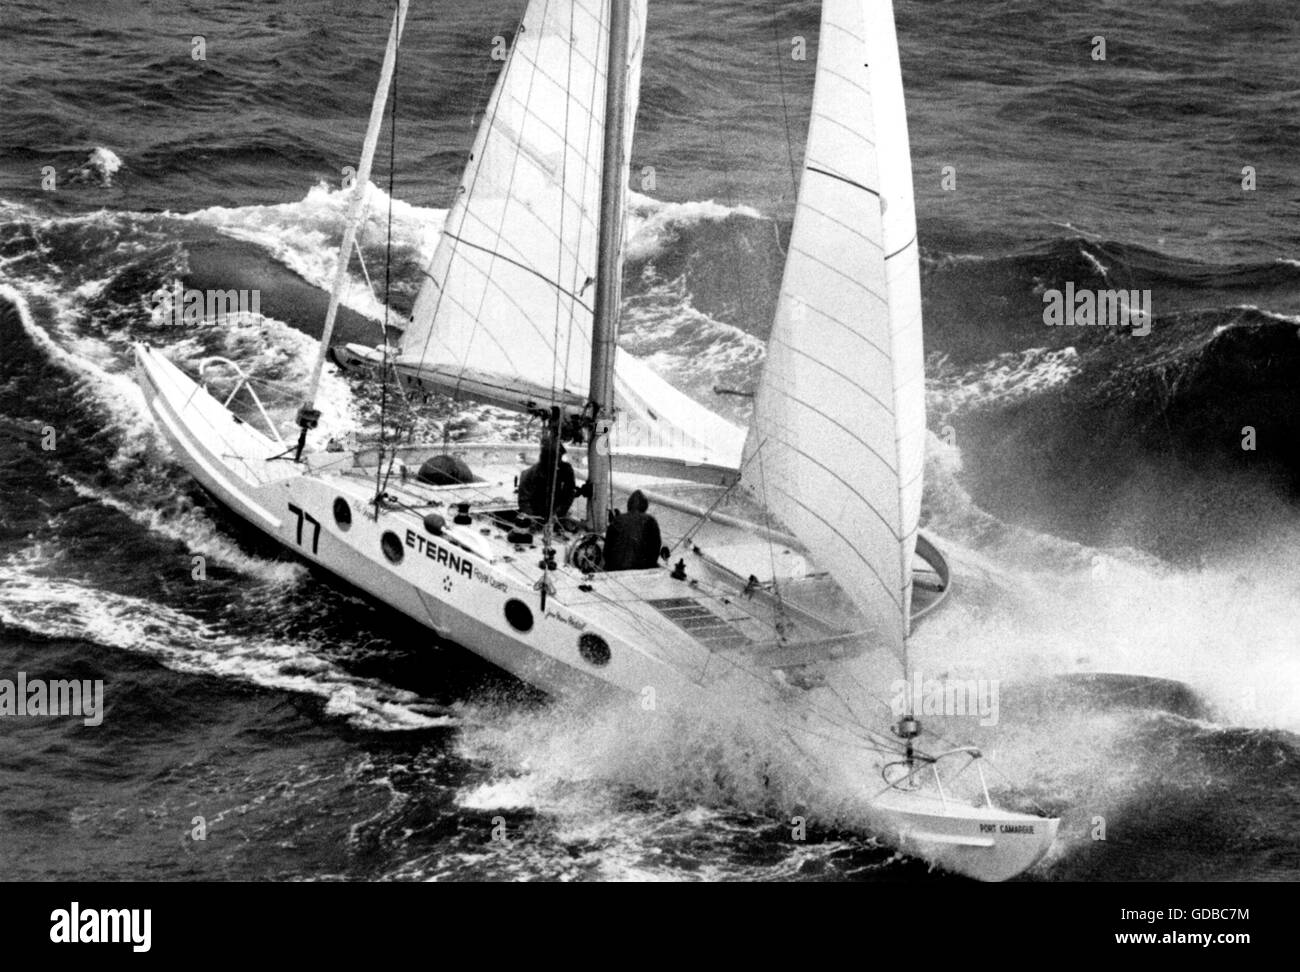 AJAX NEWS PHOTOS. 6TH JUNE, 1981. PLYMOUTH, ENGLAND.  - TWO HANDED TRANSAT - ETERNA ROYAL QUARTZ, LIGHTWEIGHT FRENCH PROA-CATAMARAN ENTRY IN THE TWO HANDED TRANSATLANTIC RACE POUNDS INTO HEAVY SEAS AS CREW MEMBERS JEAN MARIE VIDAL AND ELLIE AIGON STRUGGLE TO TRIM SAIL ON THEIR FRAIL VESSEL.  PHOTO:JONATHAN EASTLAND/AJAX  REF:YA ETERNA ROYAL QUARTZ 1981 Stock Photo